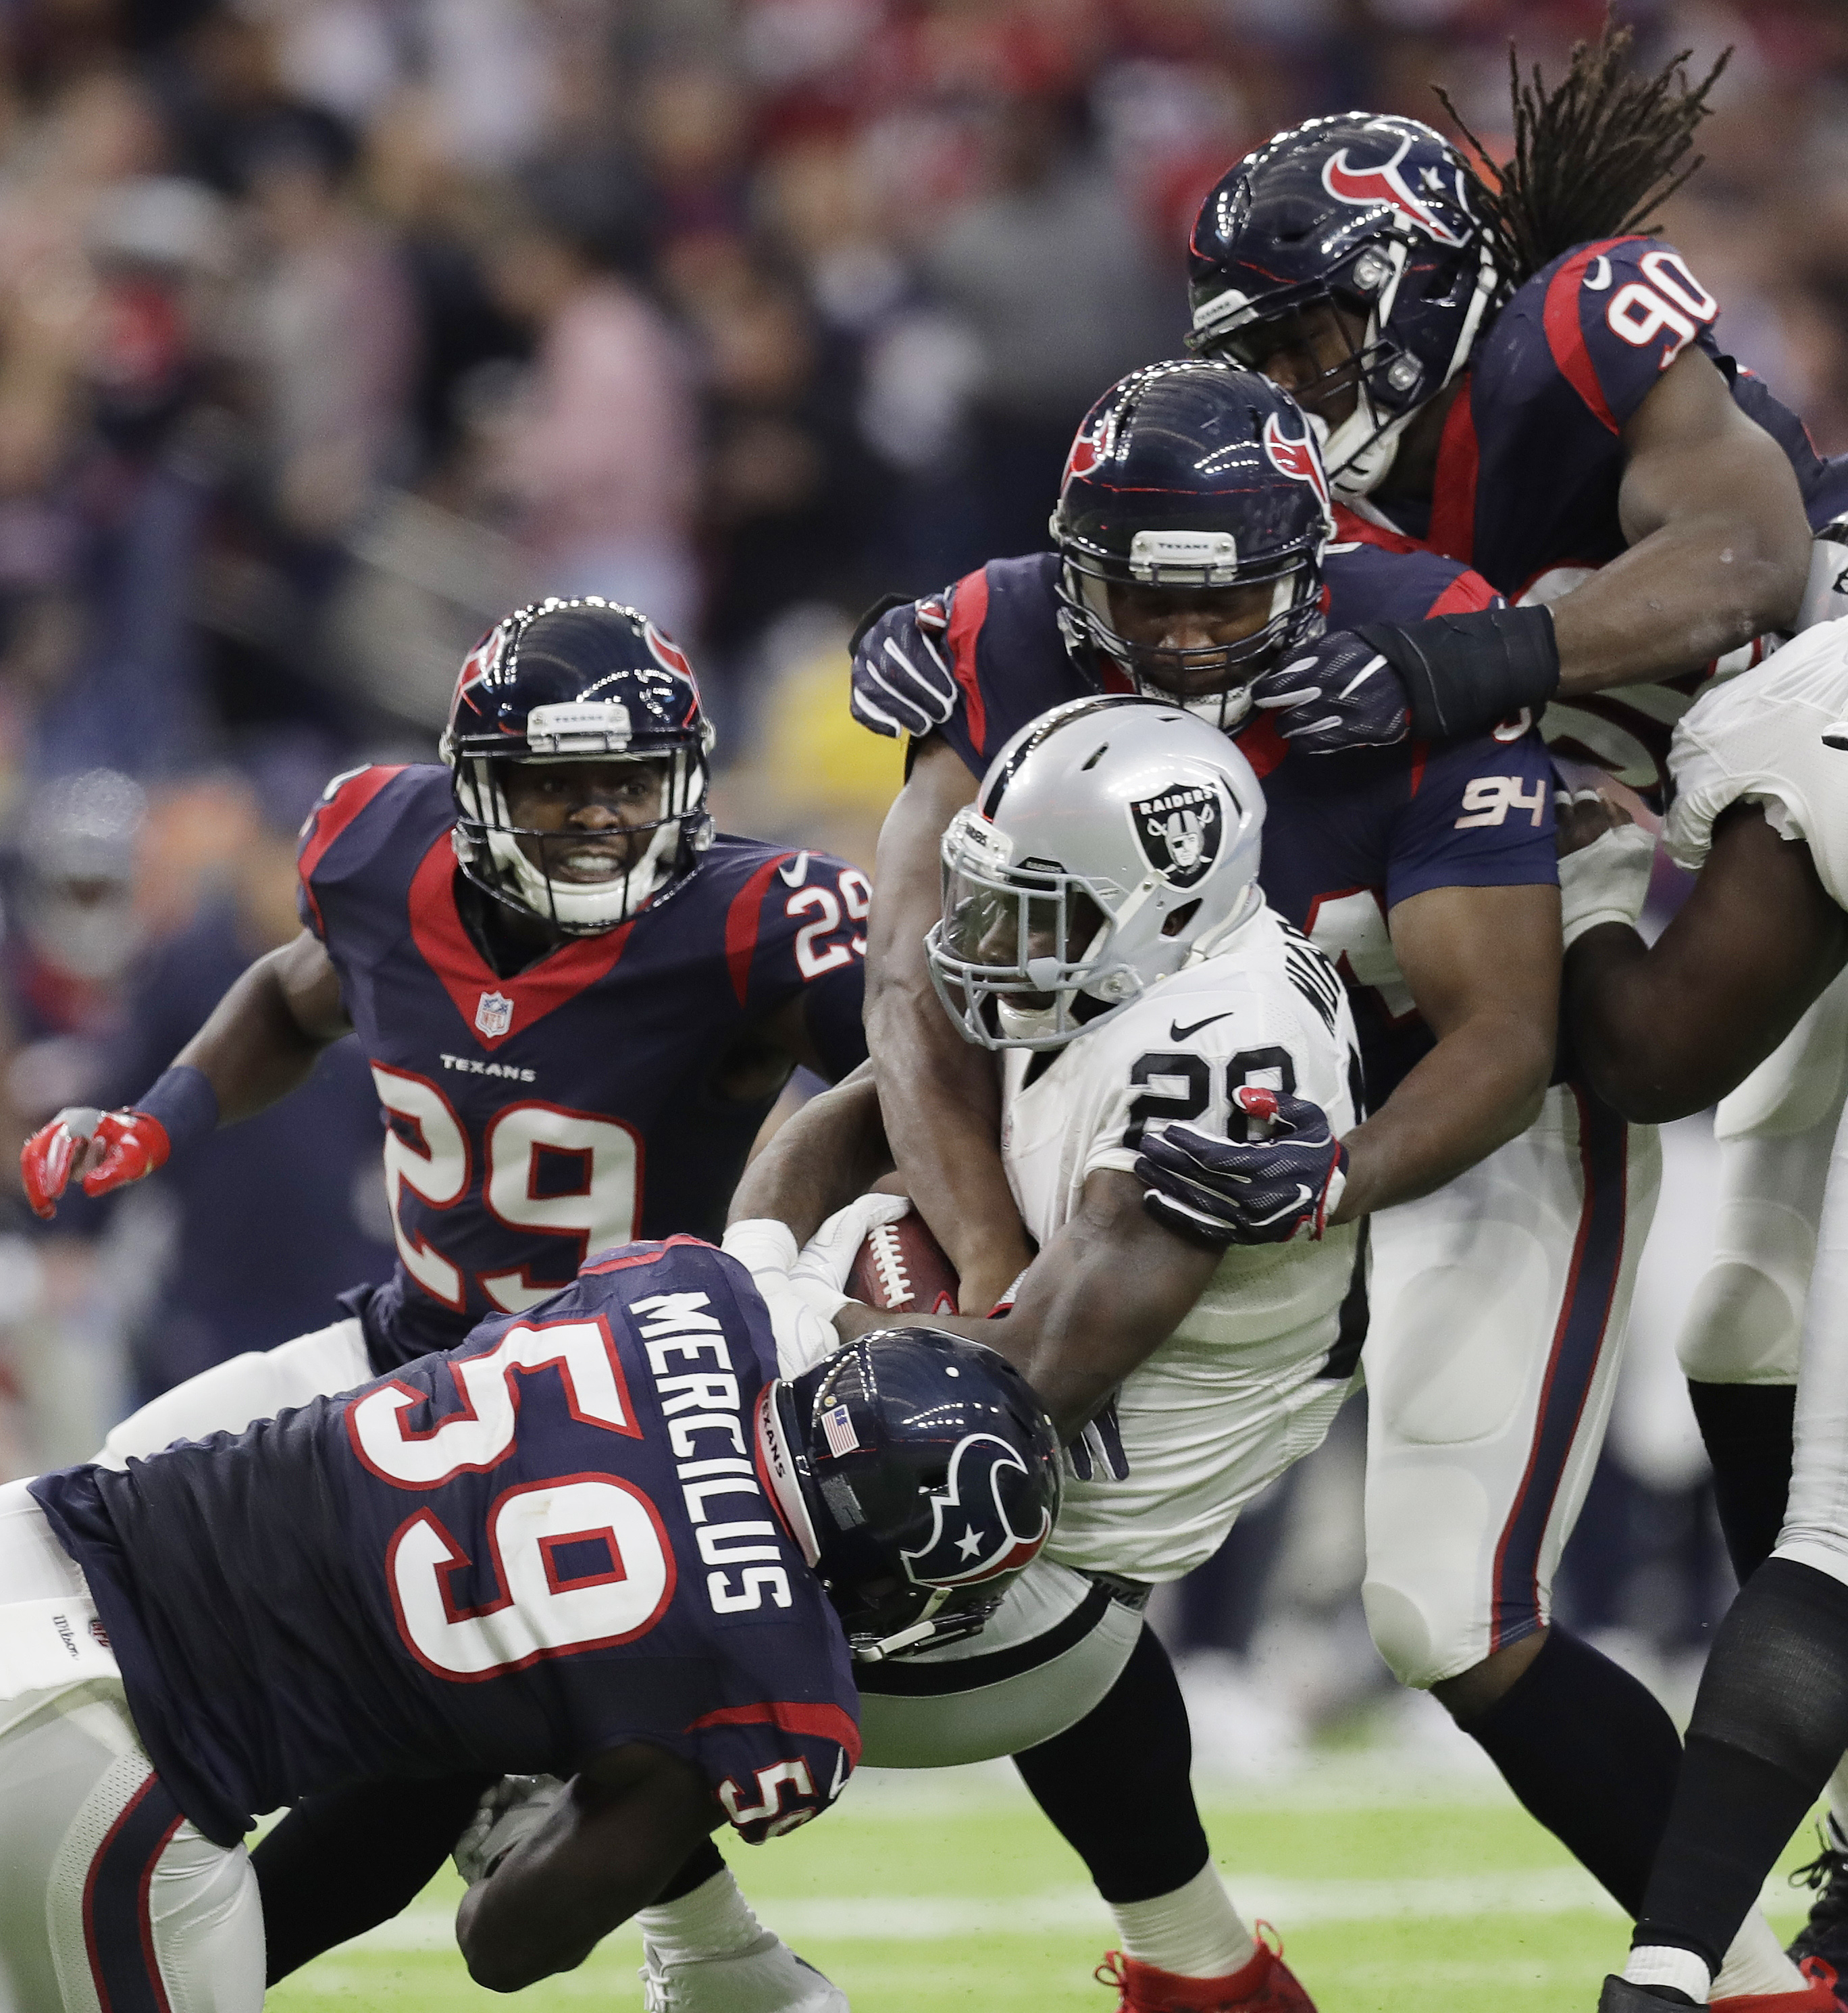 Oakland Raiders running back Latavius Murray (28) is hit by Houston Texans outside linebacker Whitney Mercilus (59) and Houston Texans defensive end Antonio Smith (94) during the second half of an AFC Wild Card NFL game Saturday, Jan. 7, 2017, in Houston. (AP Photo/Eric Gay)